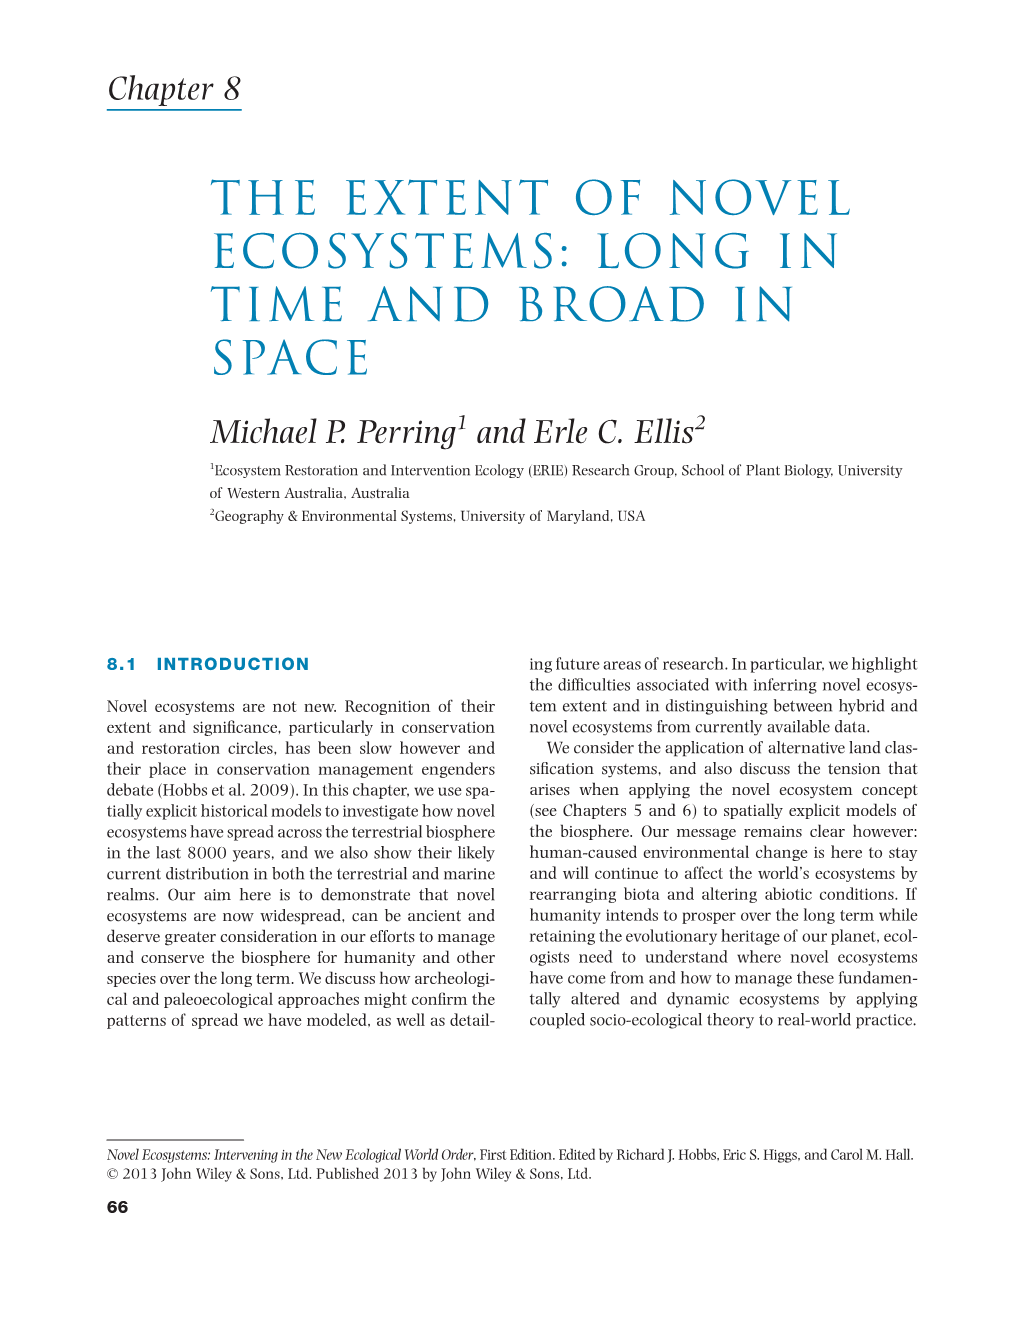 The Extent of Novel Ecosystems: Long in Time and Broad in Space Michael P